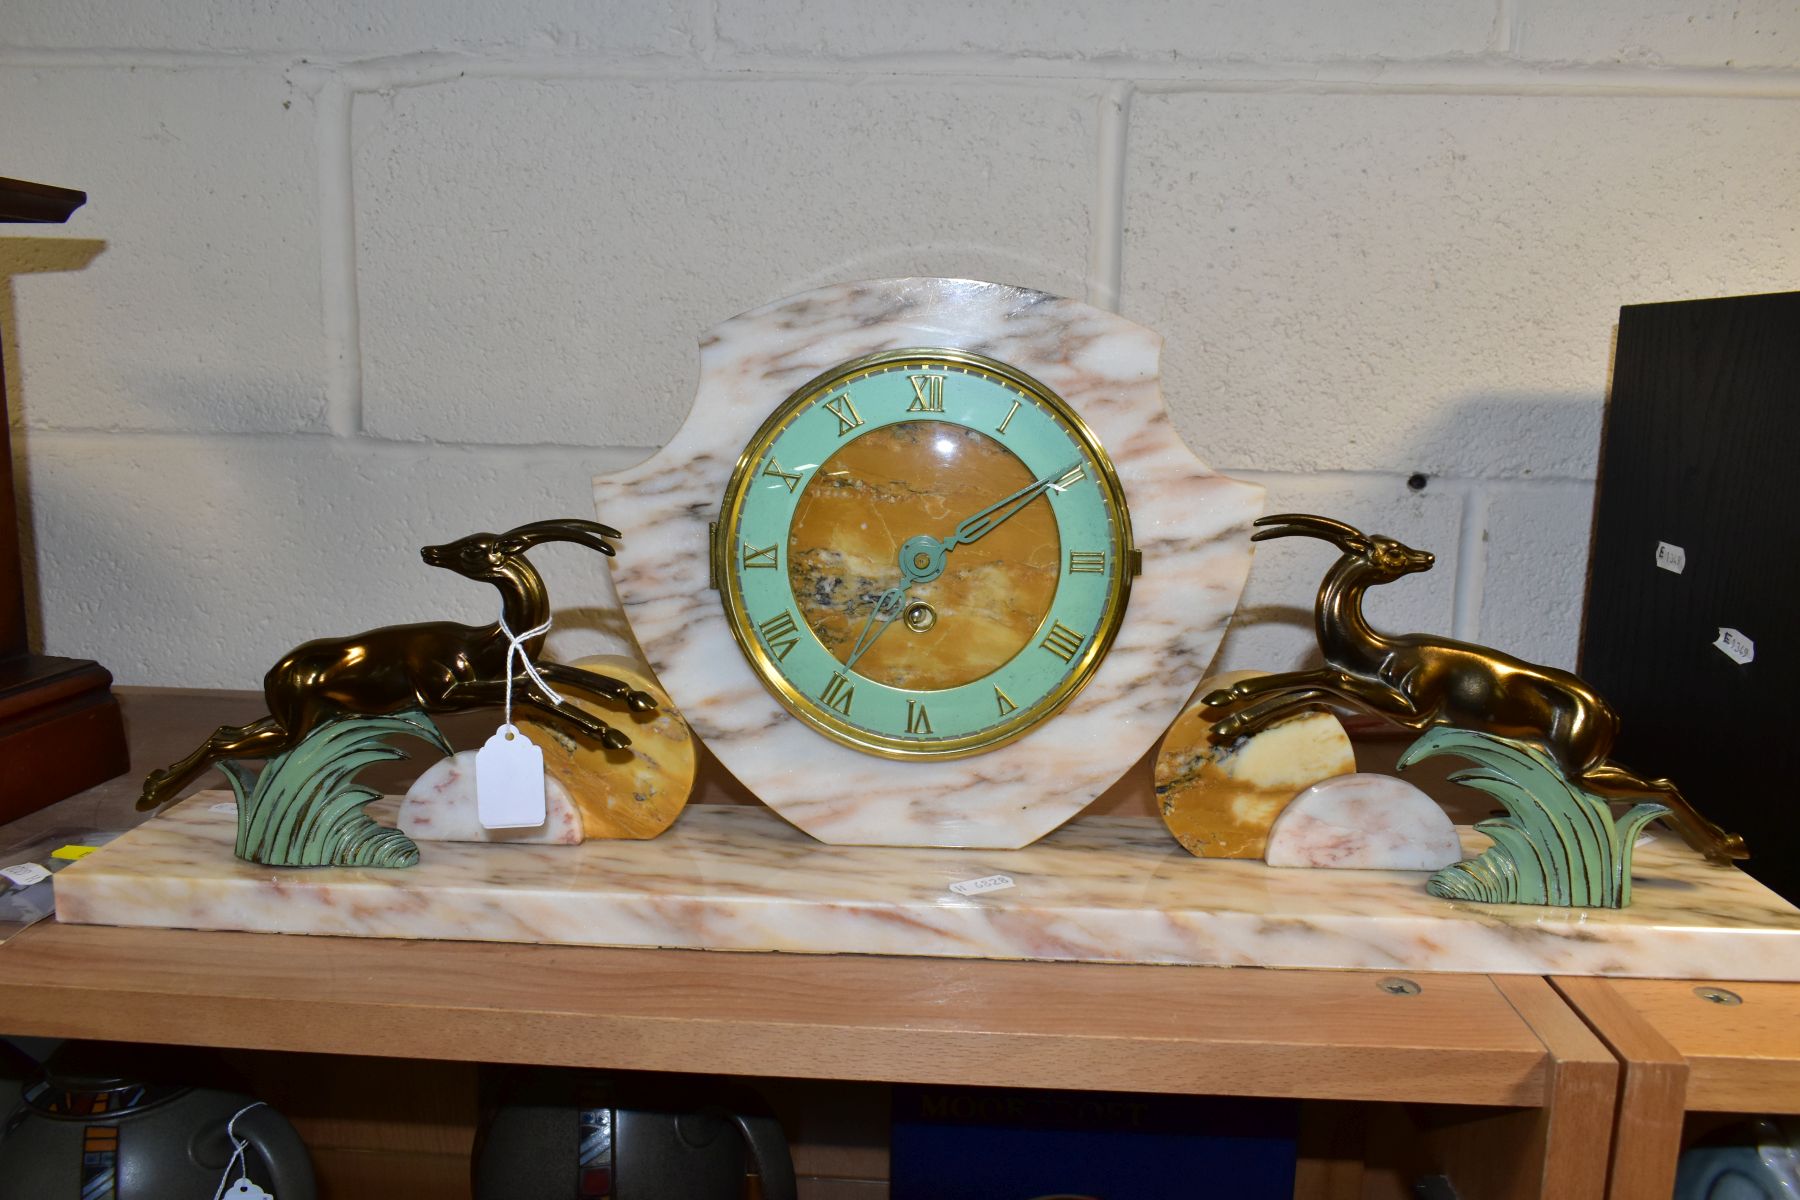 AN ART DECO STYLE CLOCK, shield shaped, Roman numerals, flanked by two leaping deer, height 24.5cm x